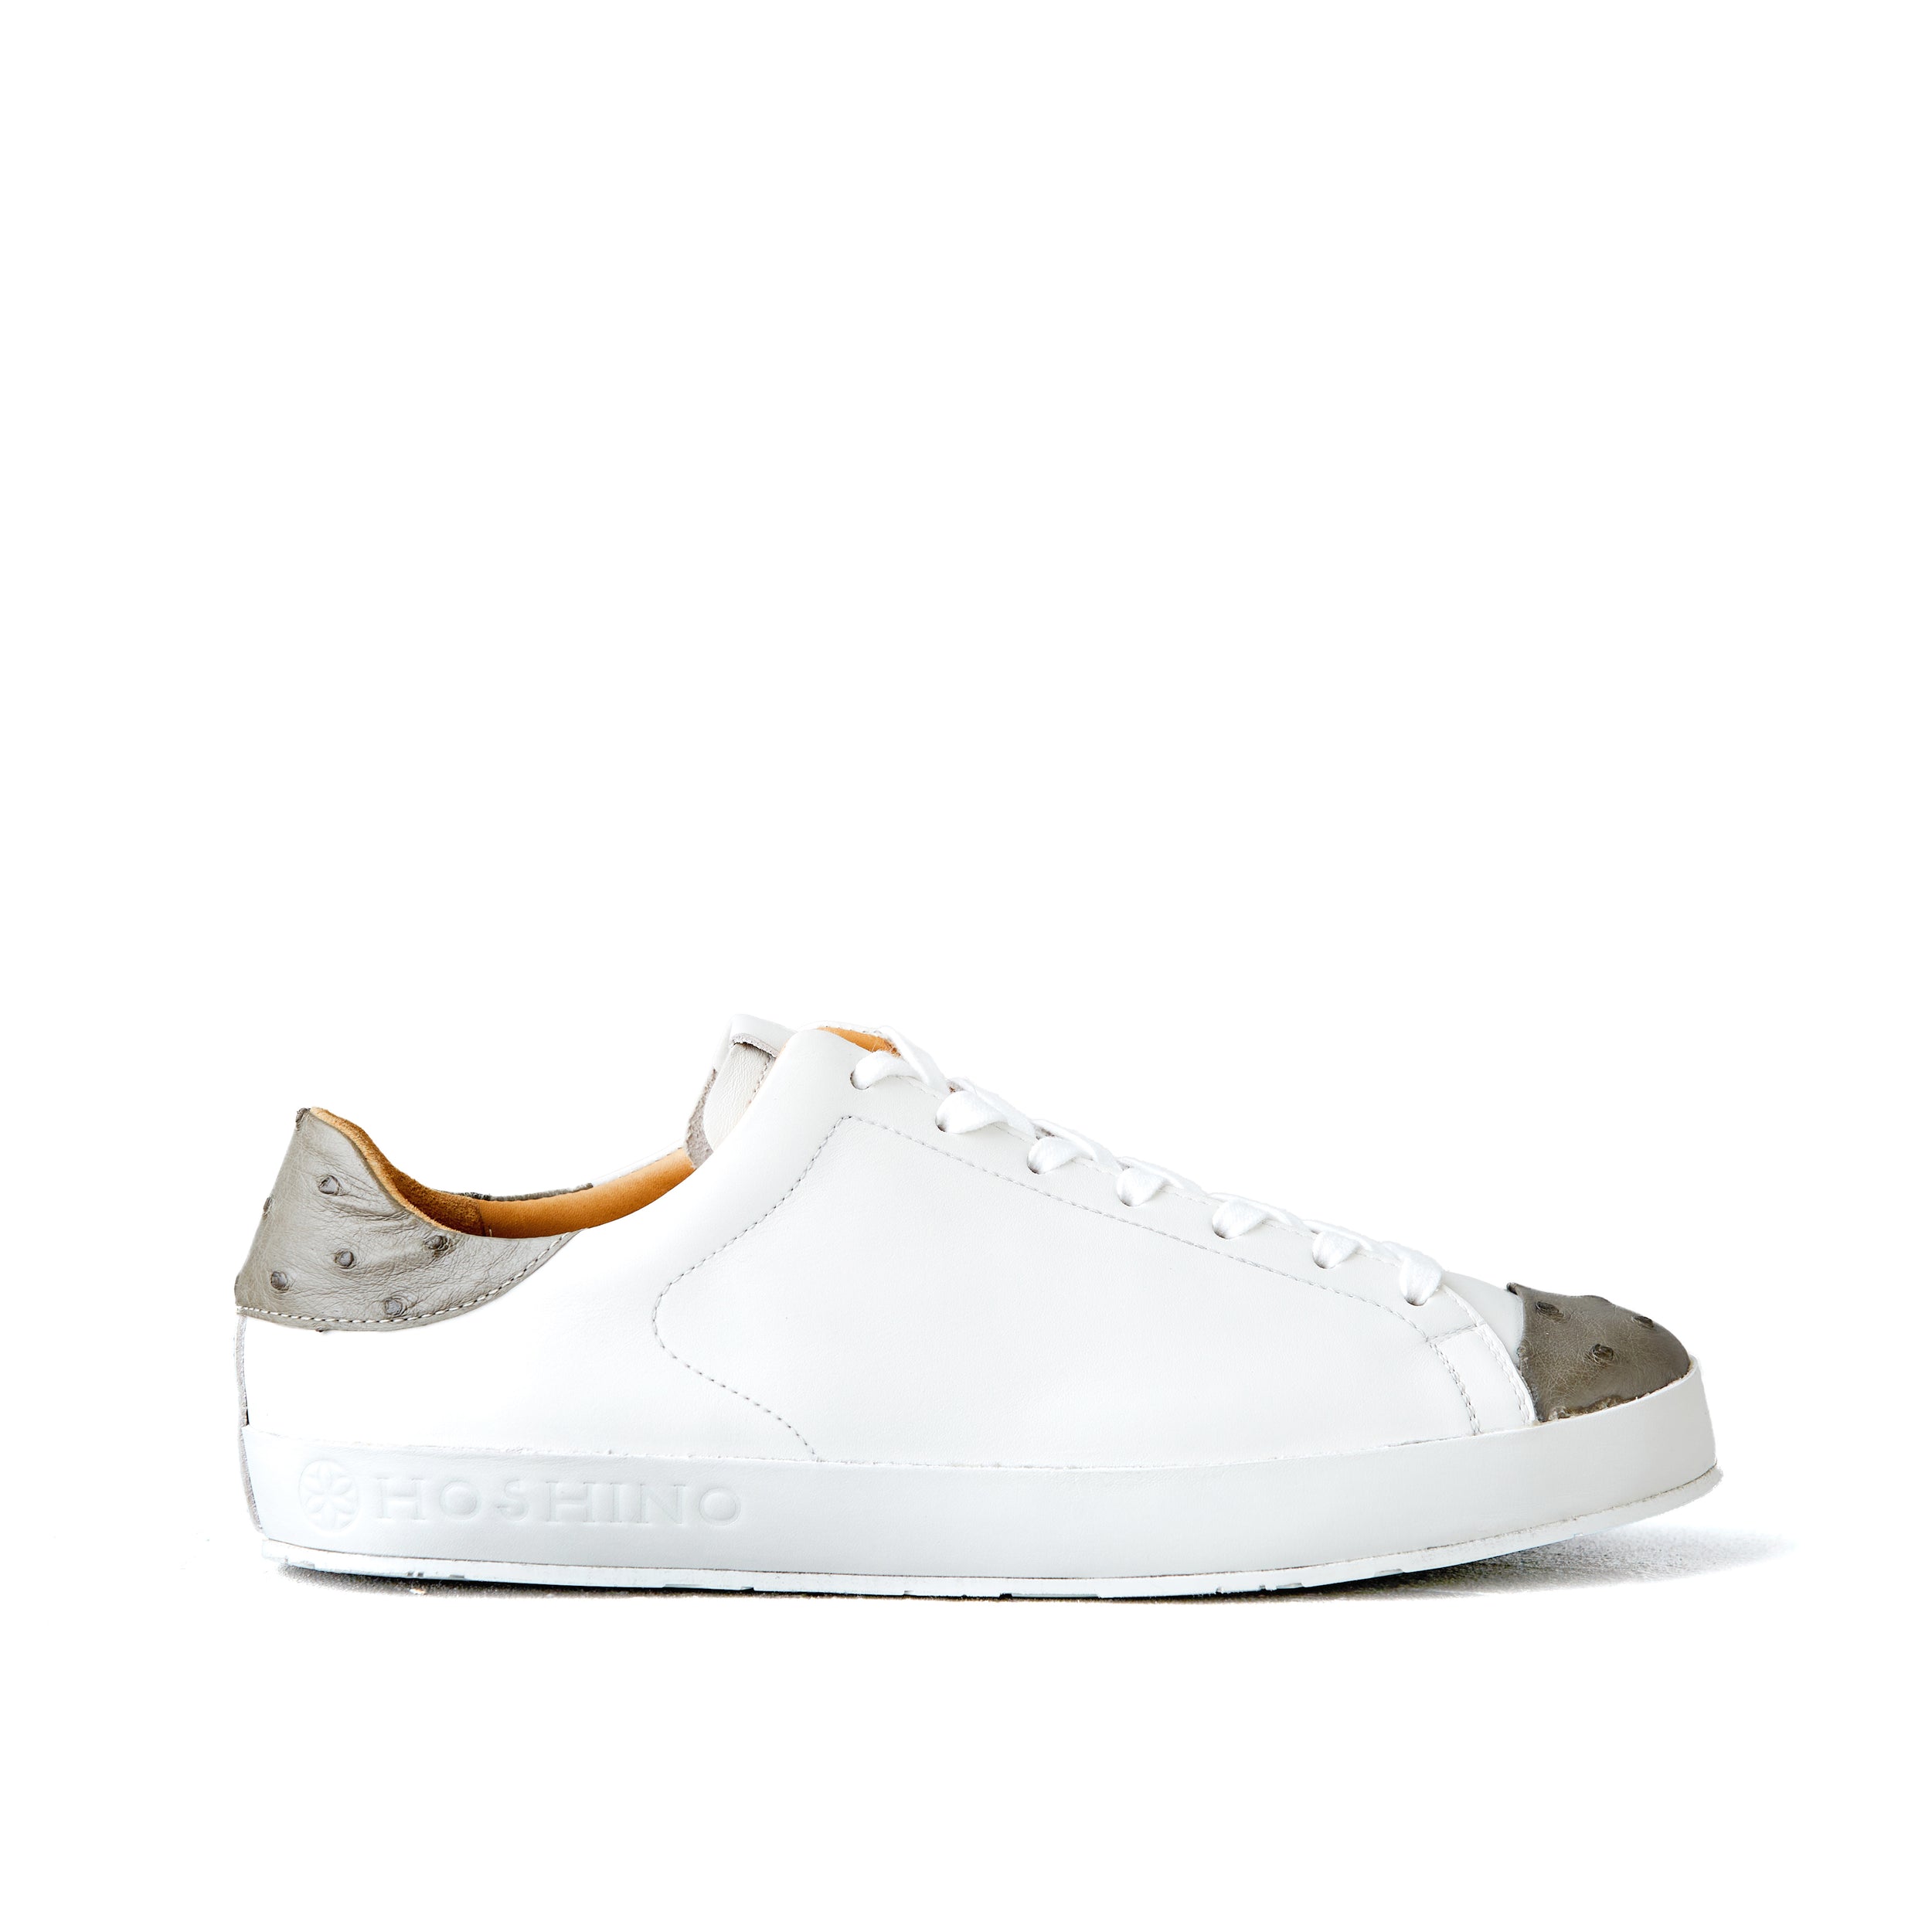 [women's] Liberte - low-top sneakers - combination toe white and gray ostrich